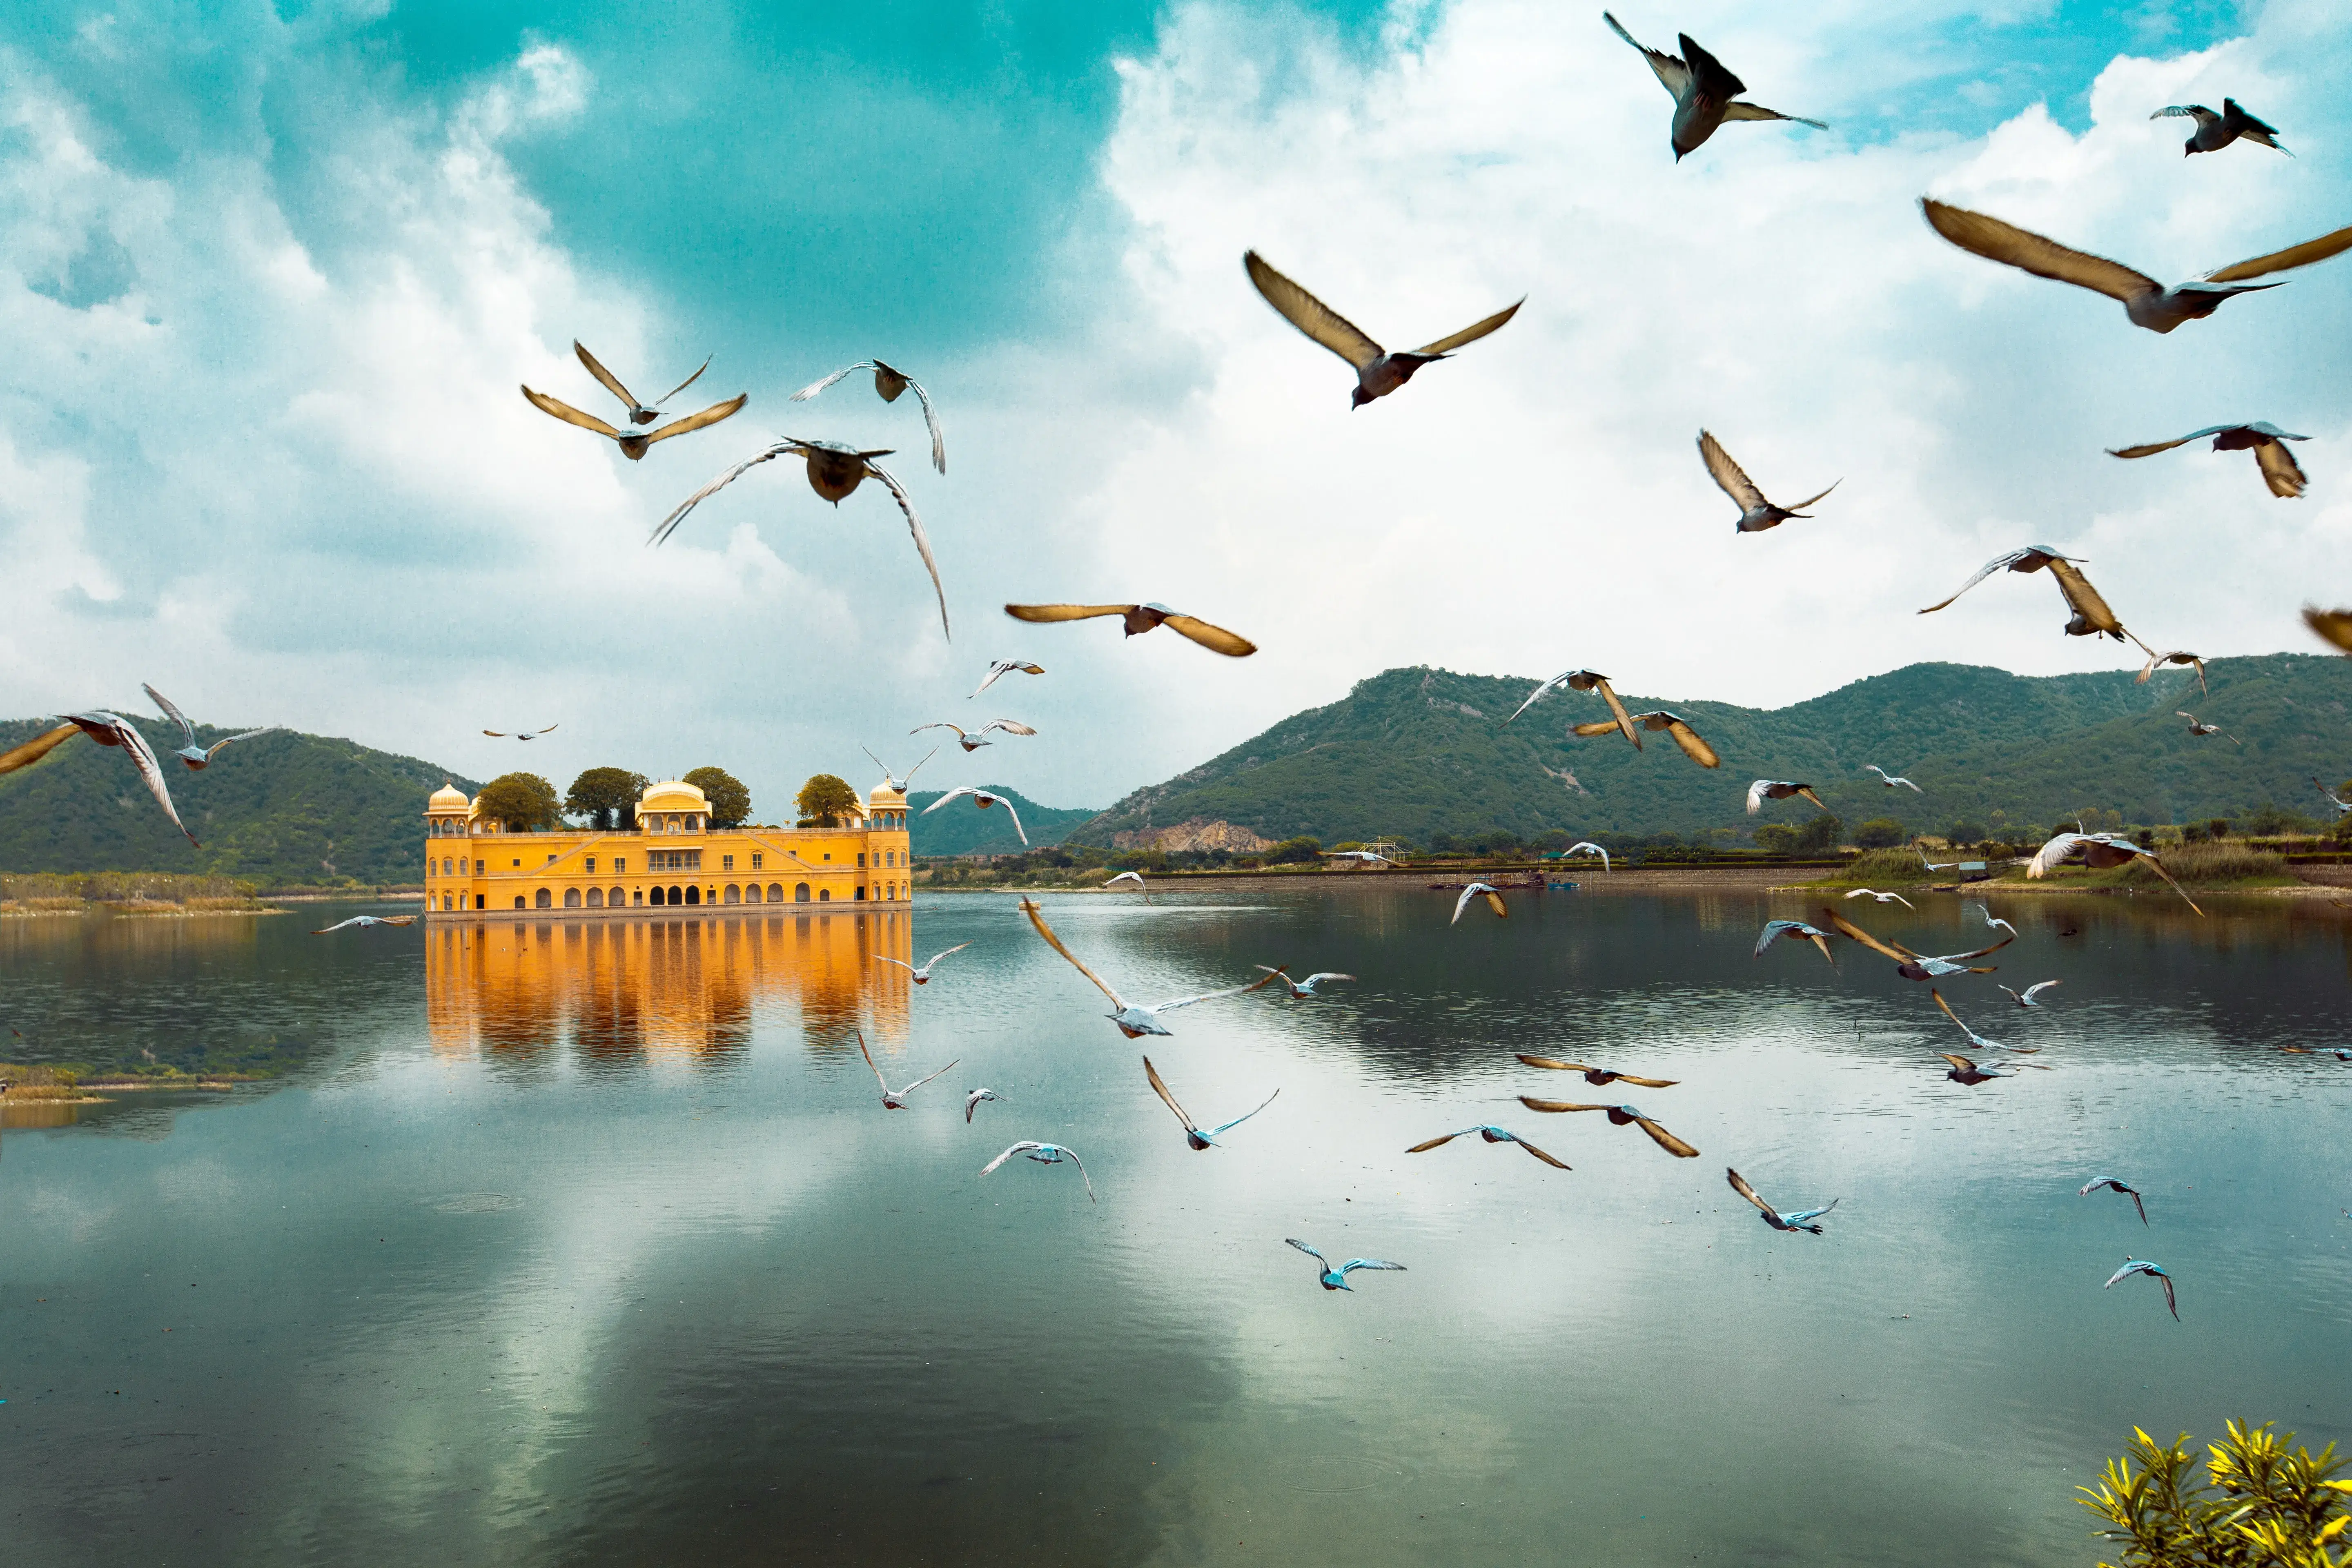 Jaipur and Agra 2 Days 1 Night Tour: From Delhi By Car